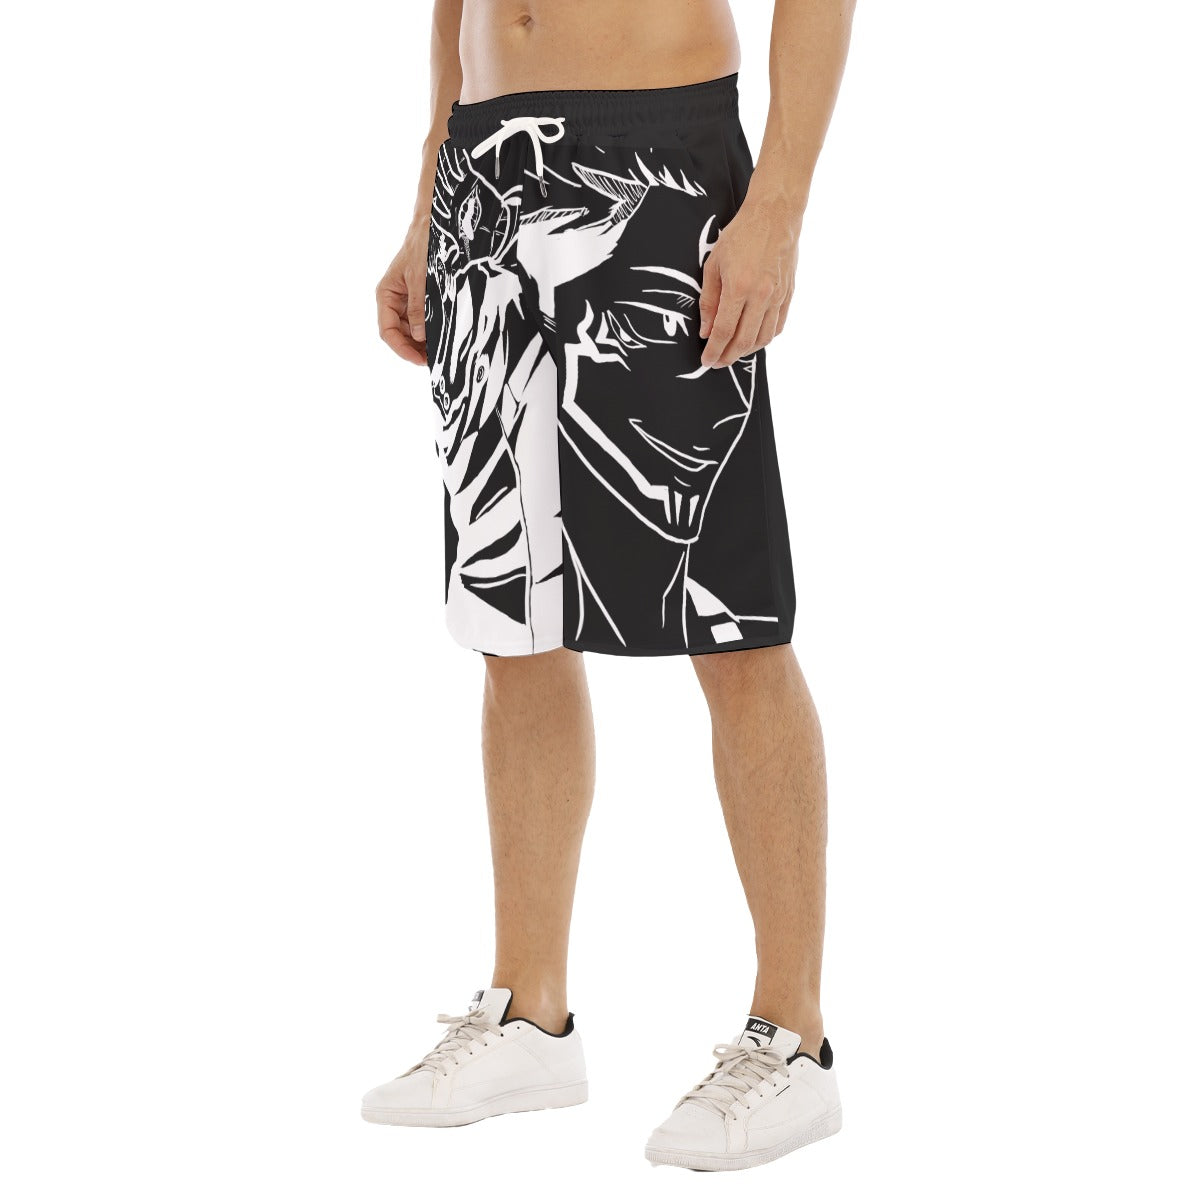 "CURSED KING VESSEL" Tether Loose Shorts